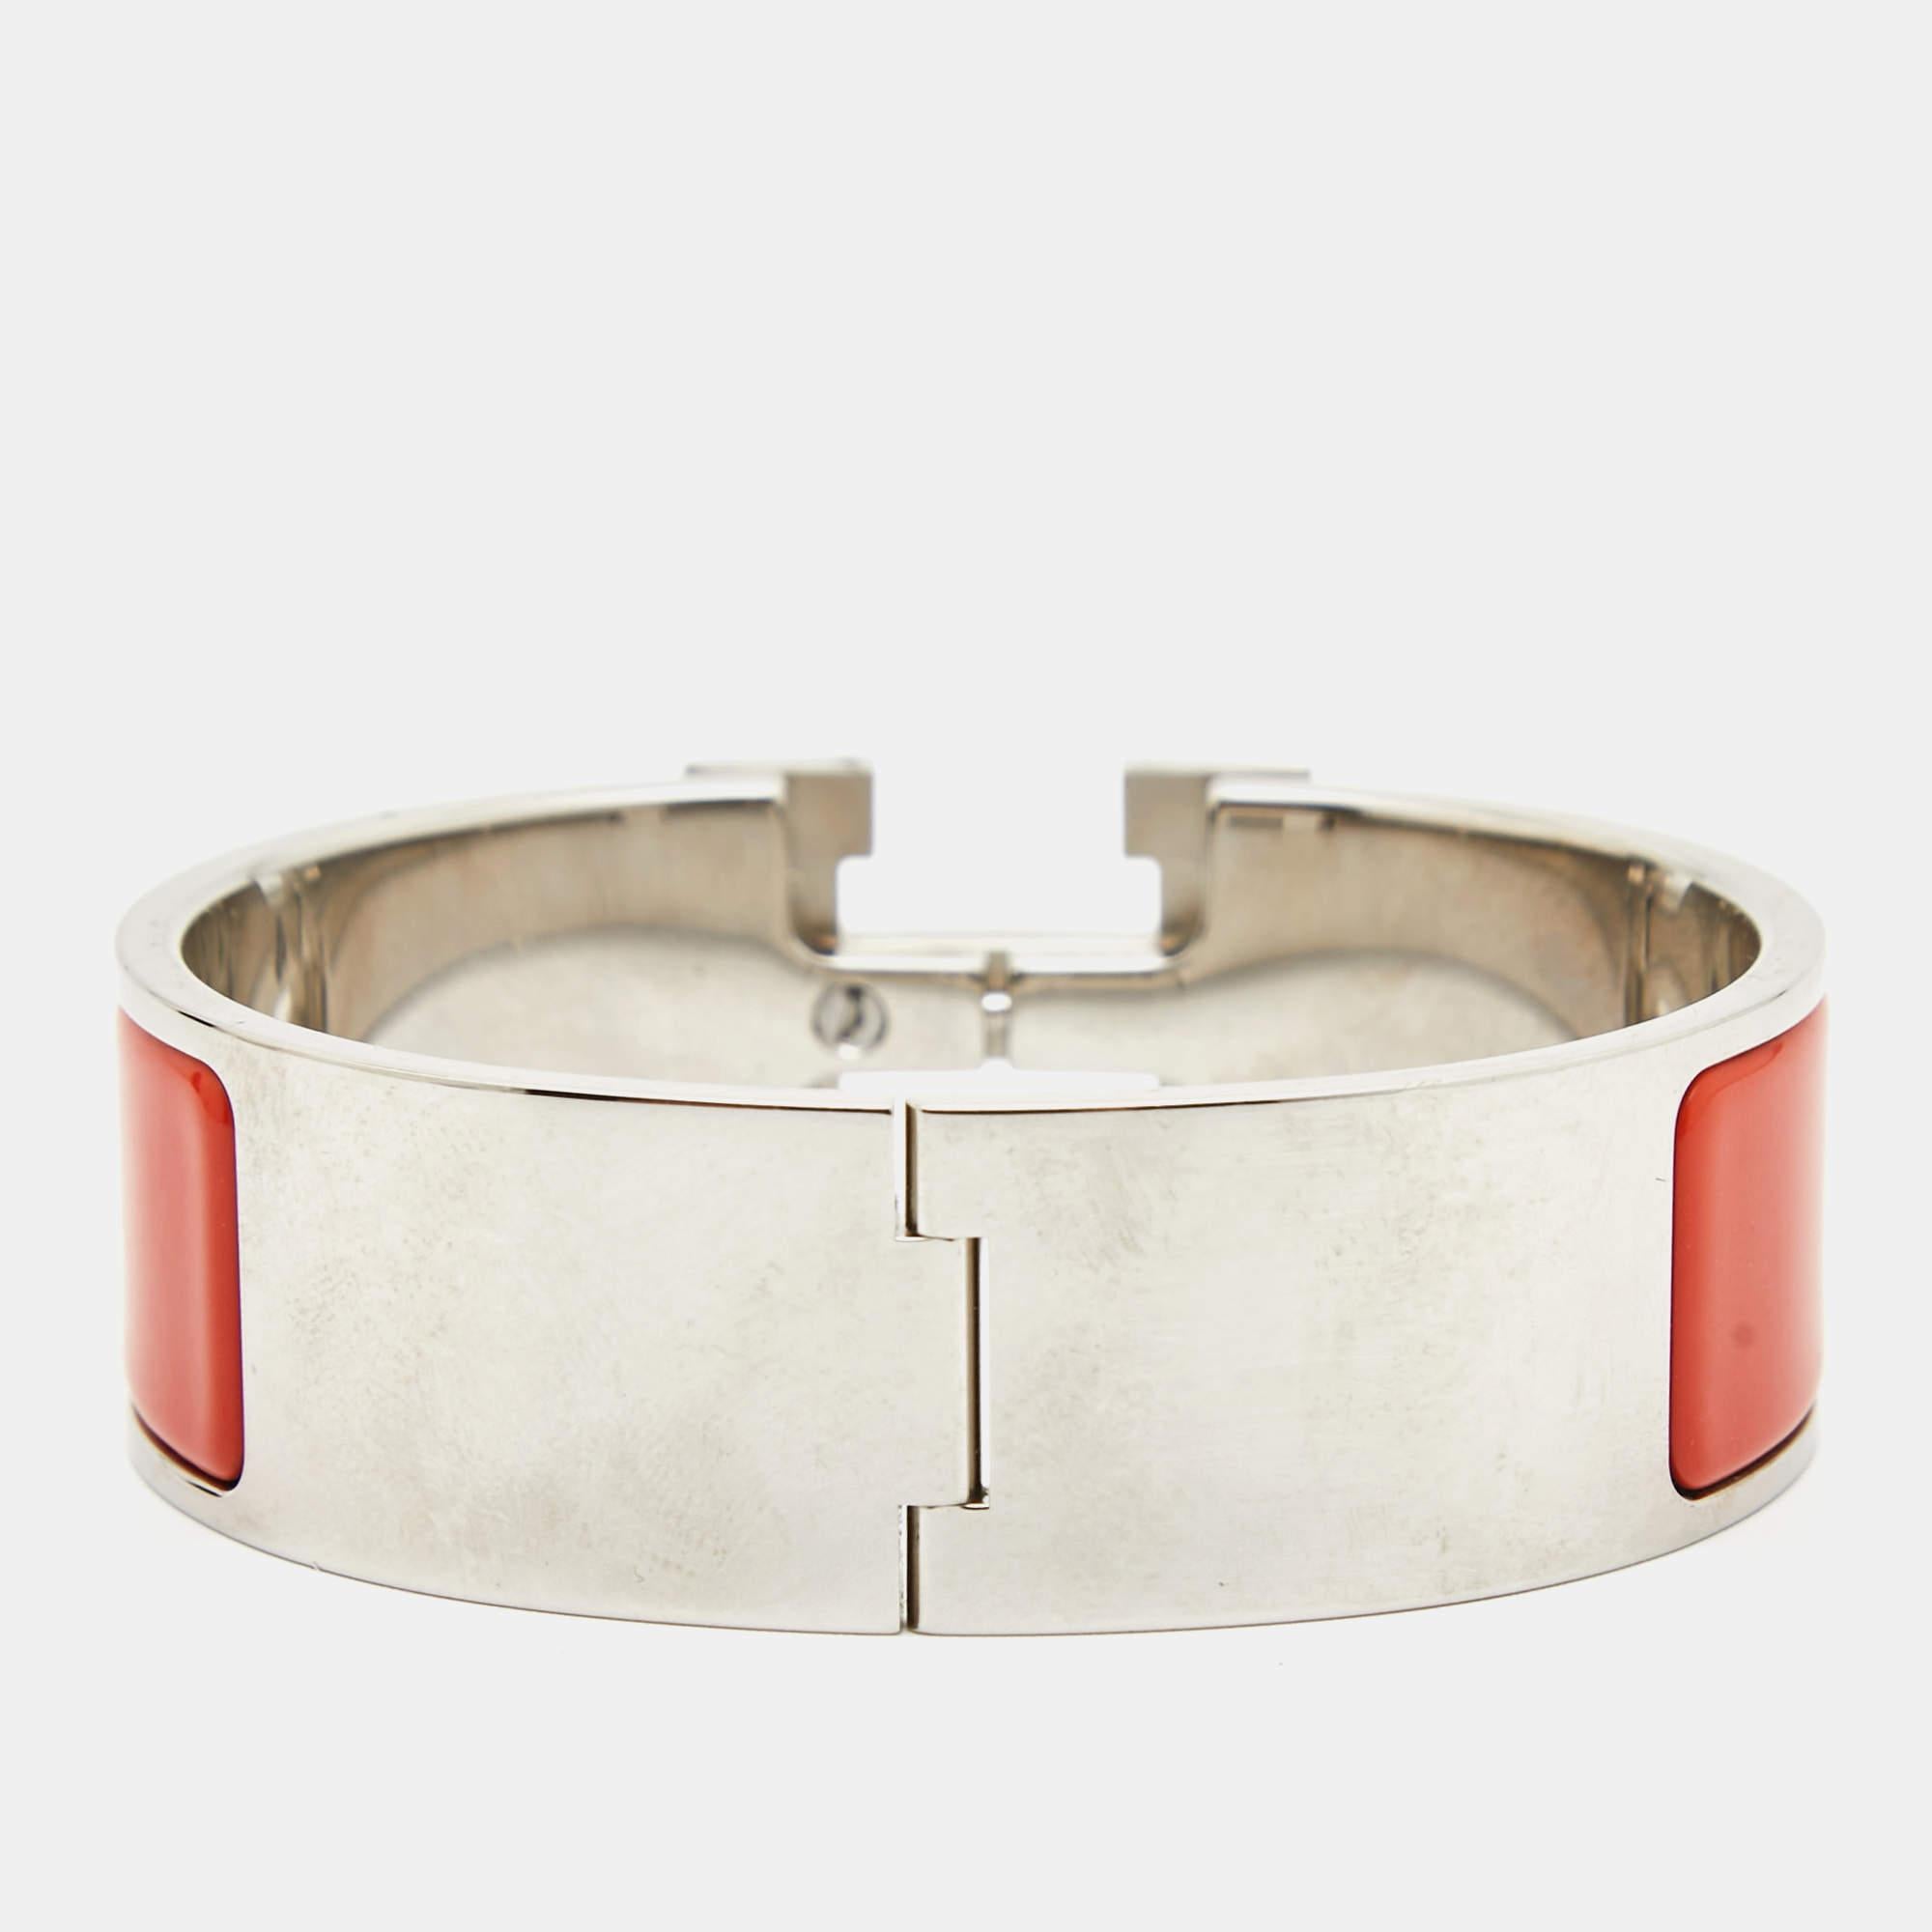 The Hermès Clic Clac H bracelet is an exquisite piece of jewelry. It features a glossy enamel band with a prominent palladium-plated H-shaped clasp, creating a striking contrast. This luxurious and elegant accessory embodies timeless style and